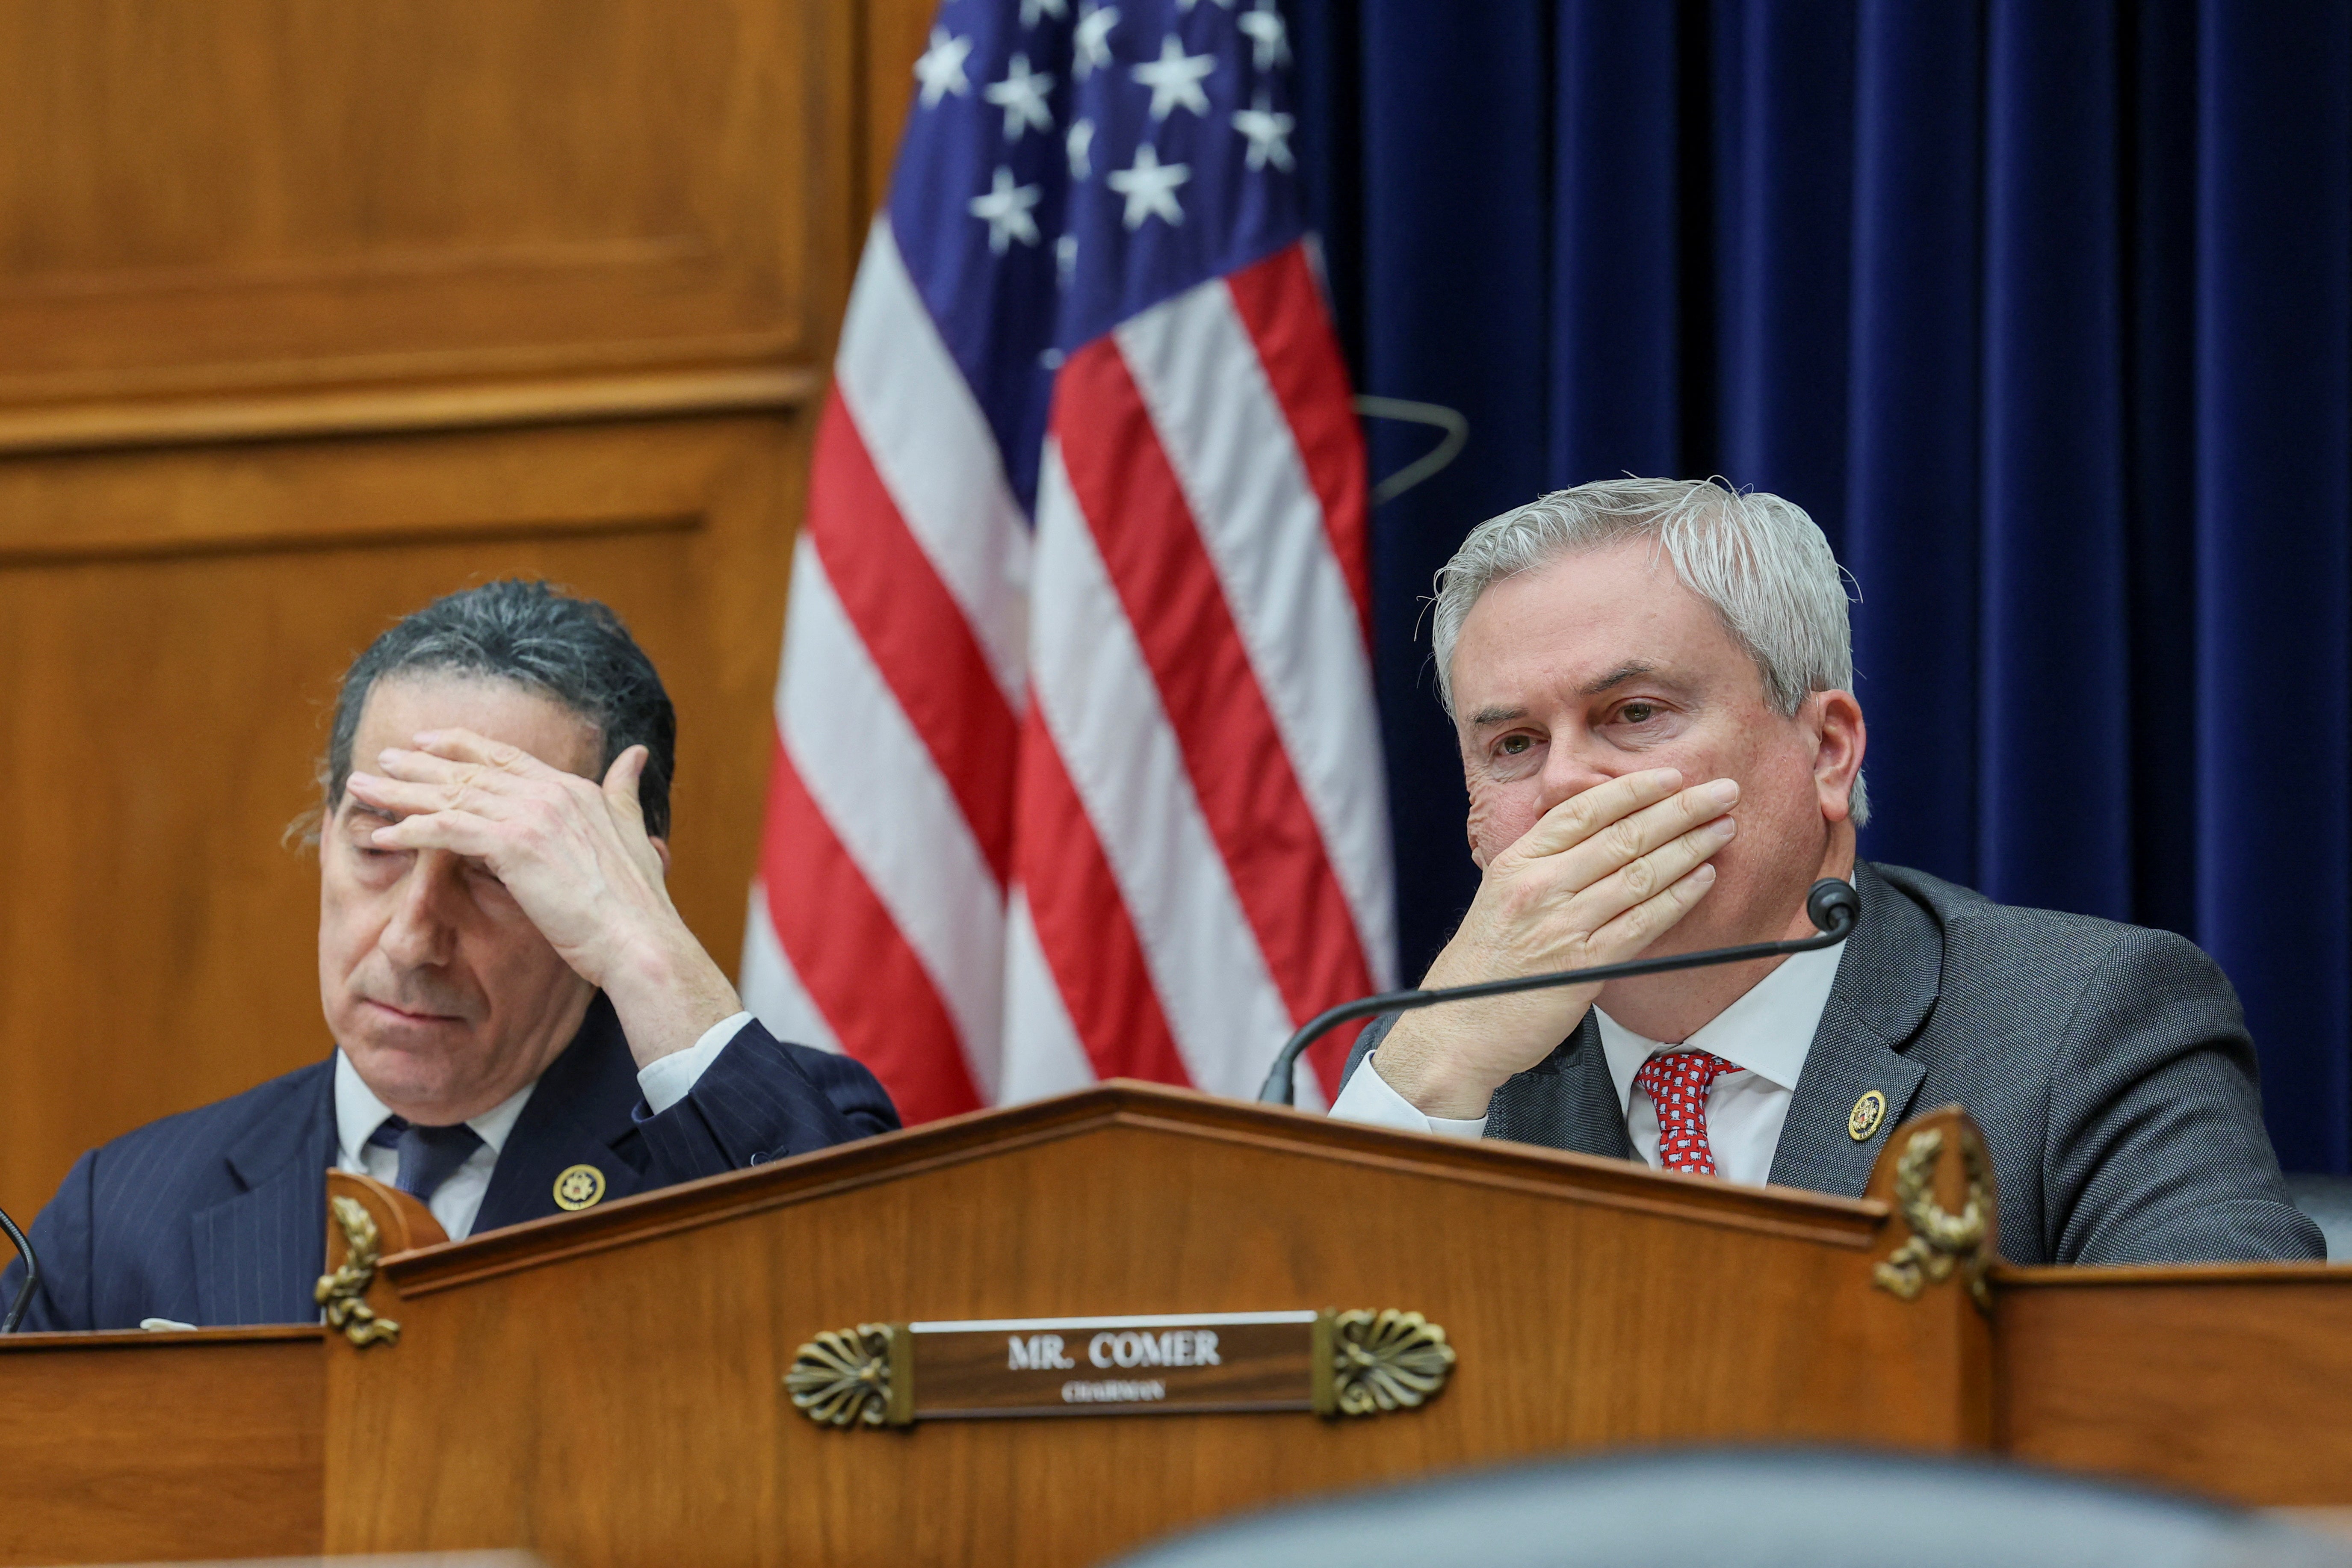 

<p>Ranking member Jamie Raskin (D-MD) and House Oversight Committee Chairman James Comer (R-KY) cover their faces during a House Oversight and Accountability Committee hearing as part of the House of Republicans’ impeachment probe into President Joe Biden</p>
<p>” height=”3667″ width=”5500″ layout=”responsive” i-amphtml-layout=”responsive”><i-amphtml-sizer slot=